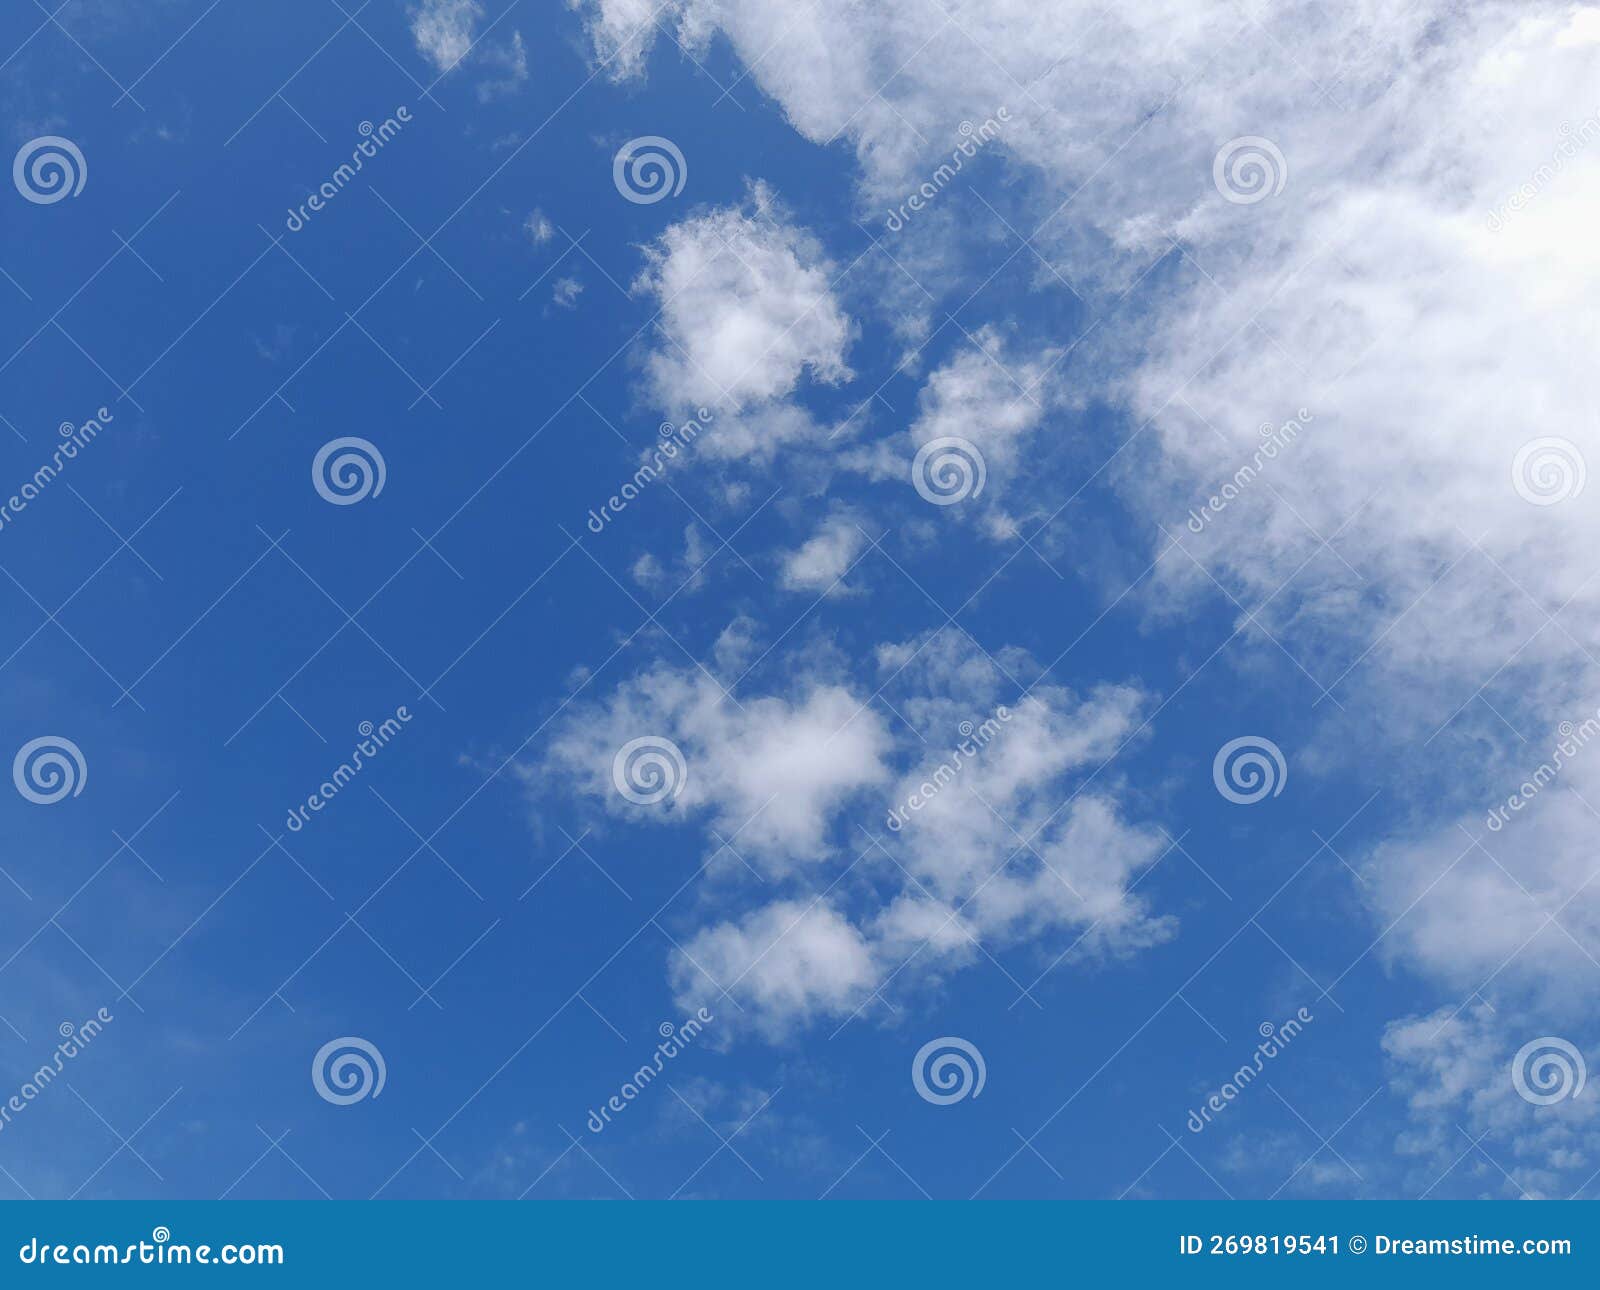 Beautiful White Clouds on Deep Blue Sky Background. Large Bright Soft ...